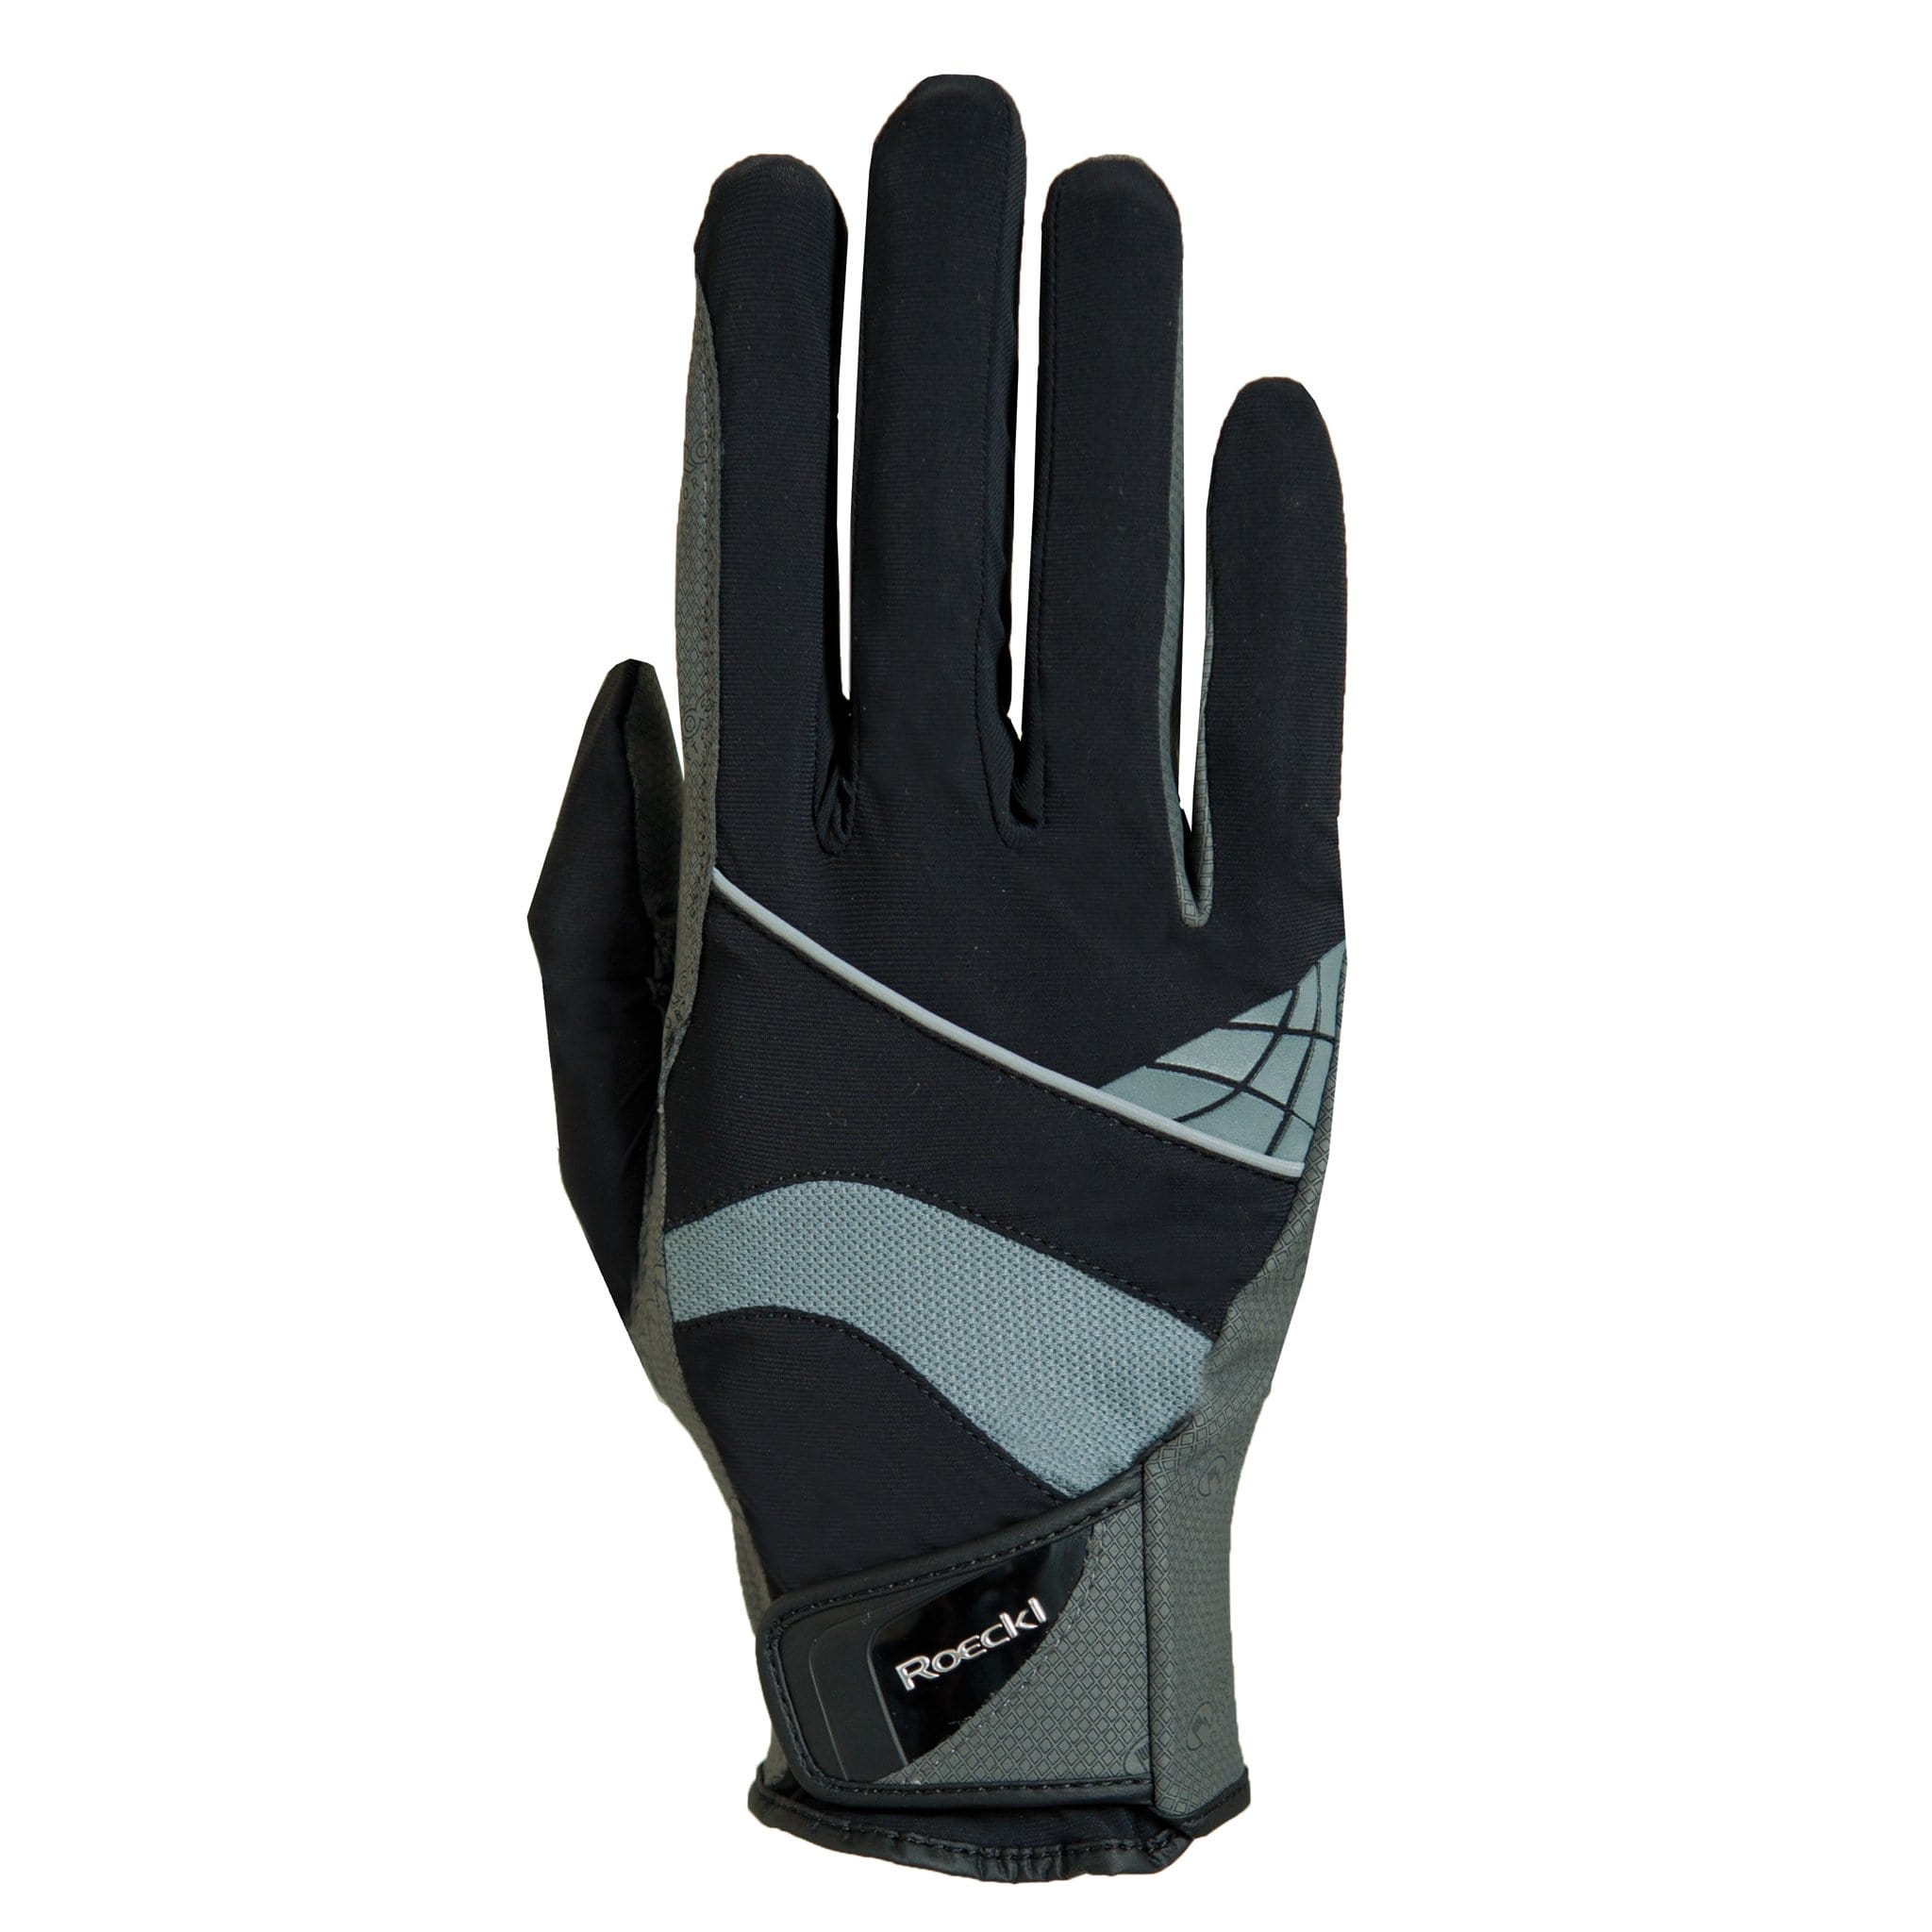 Roeckl Montreal Gloves Black and Grey 3301-273-008